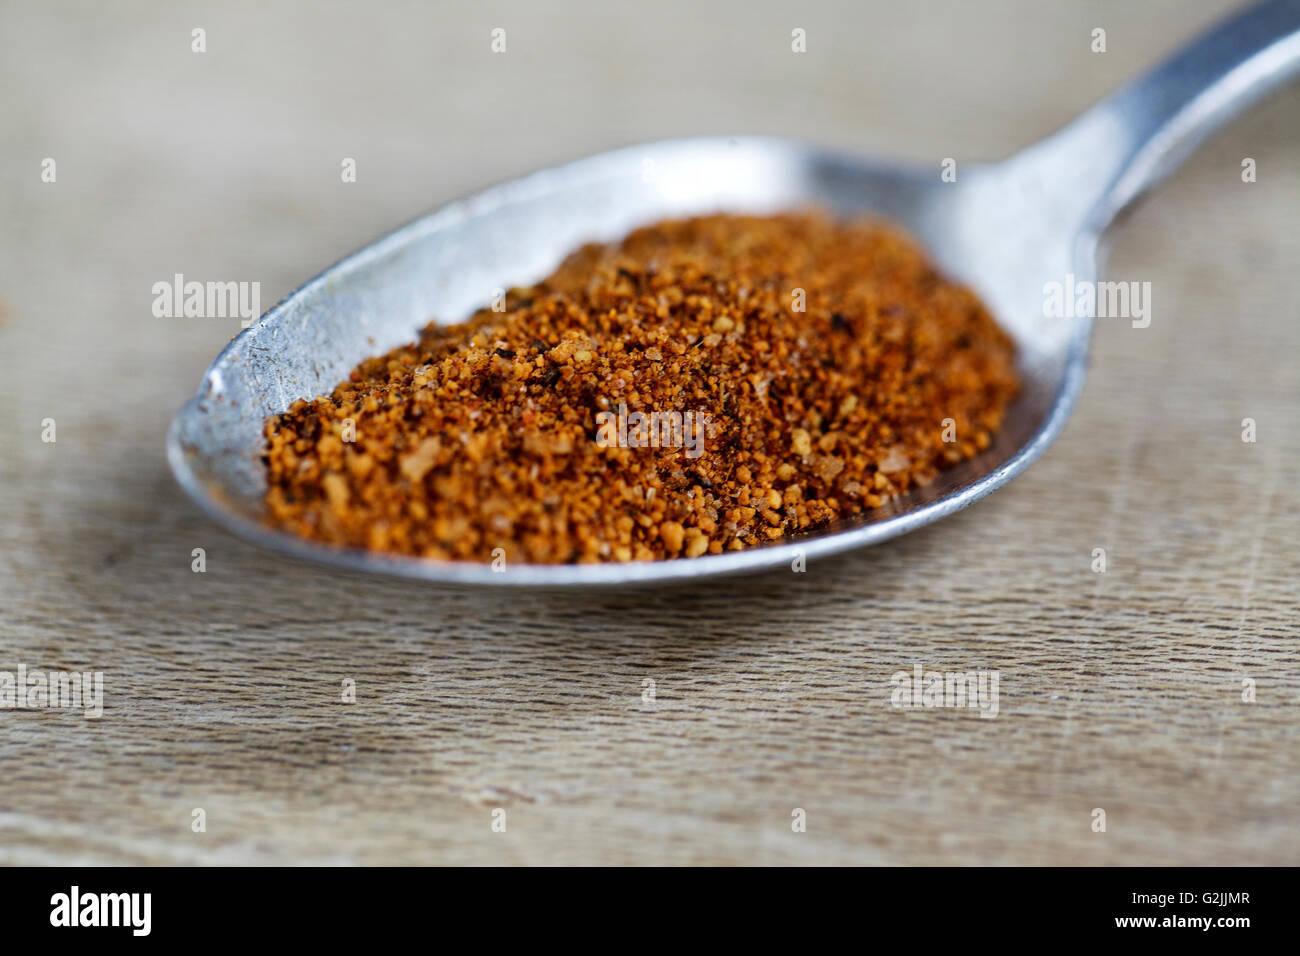 Dried Red Chili Pepper flakes presented on metal spoon Stock Photo